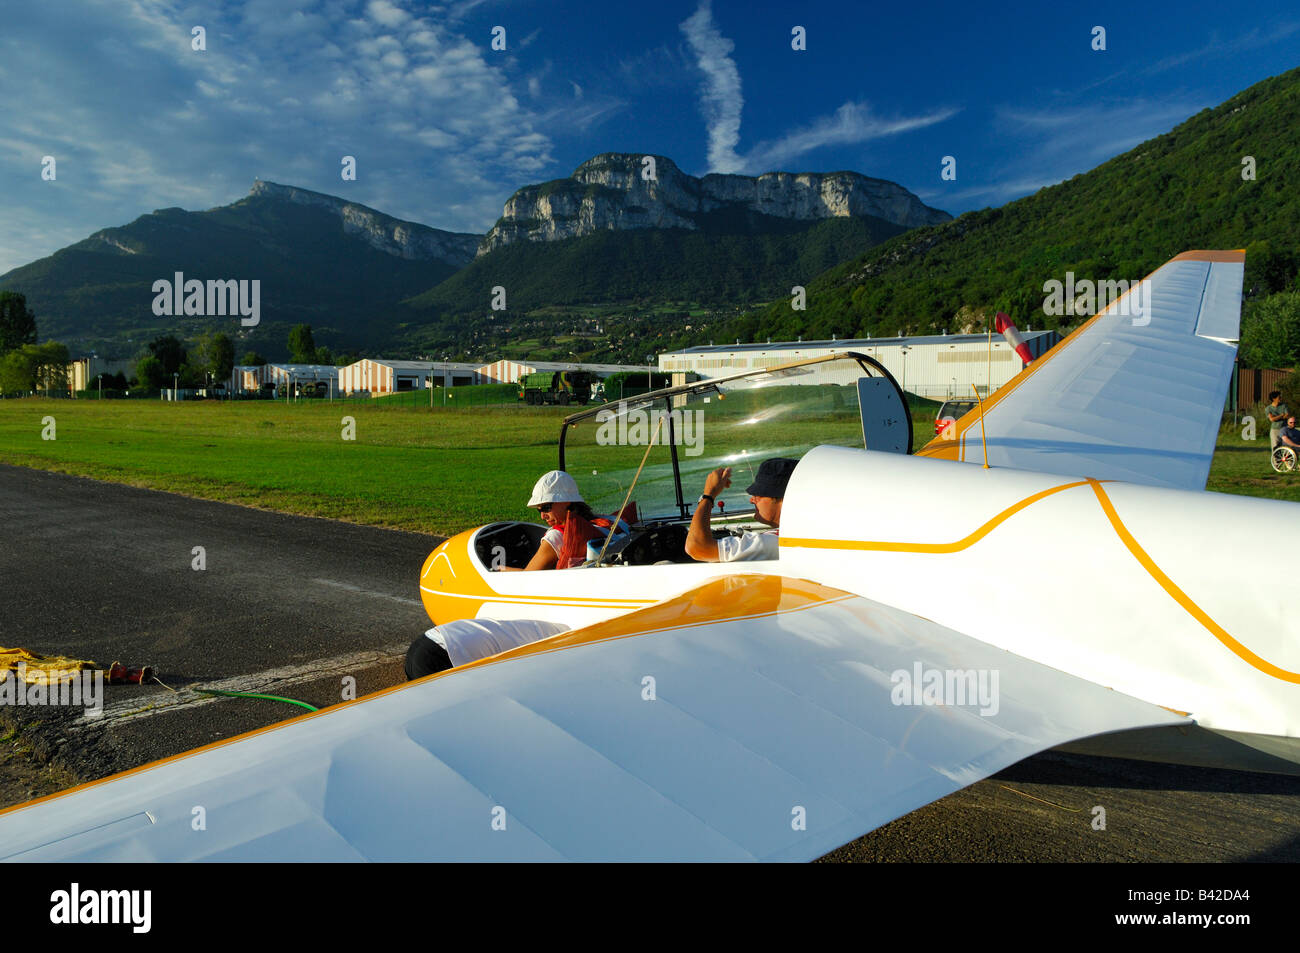 A trainer glider ASK-13 ready to take off  with launch system on runway airfield - France Stock Photo